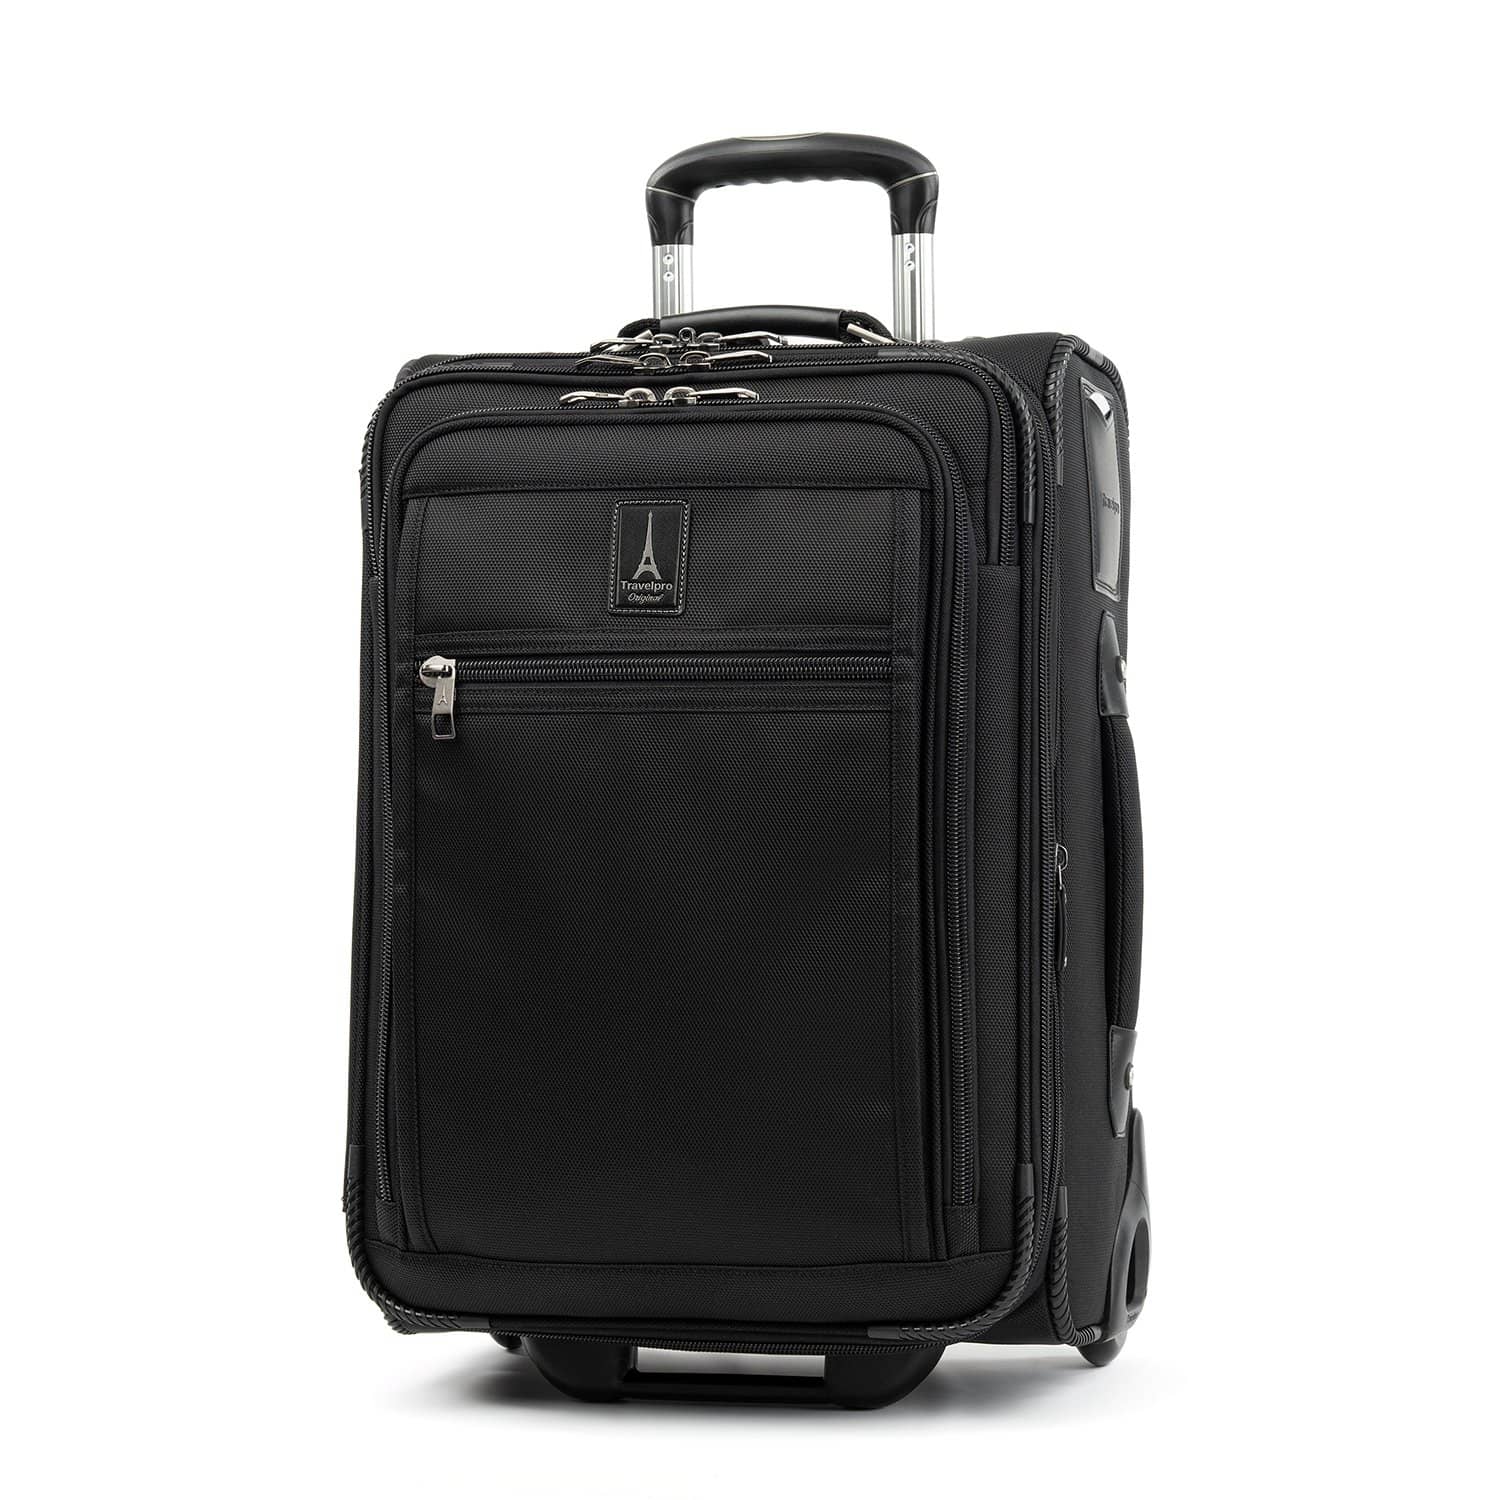 travelpro carry on underseat luggage